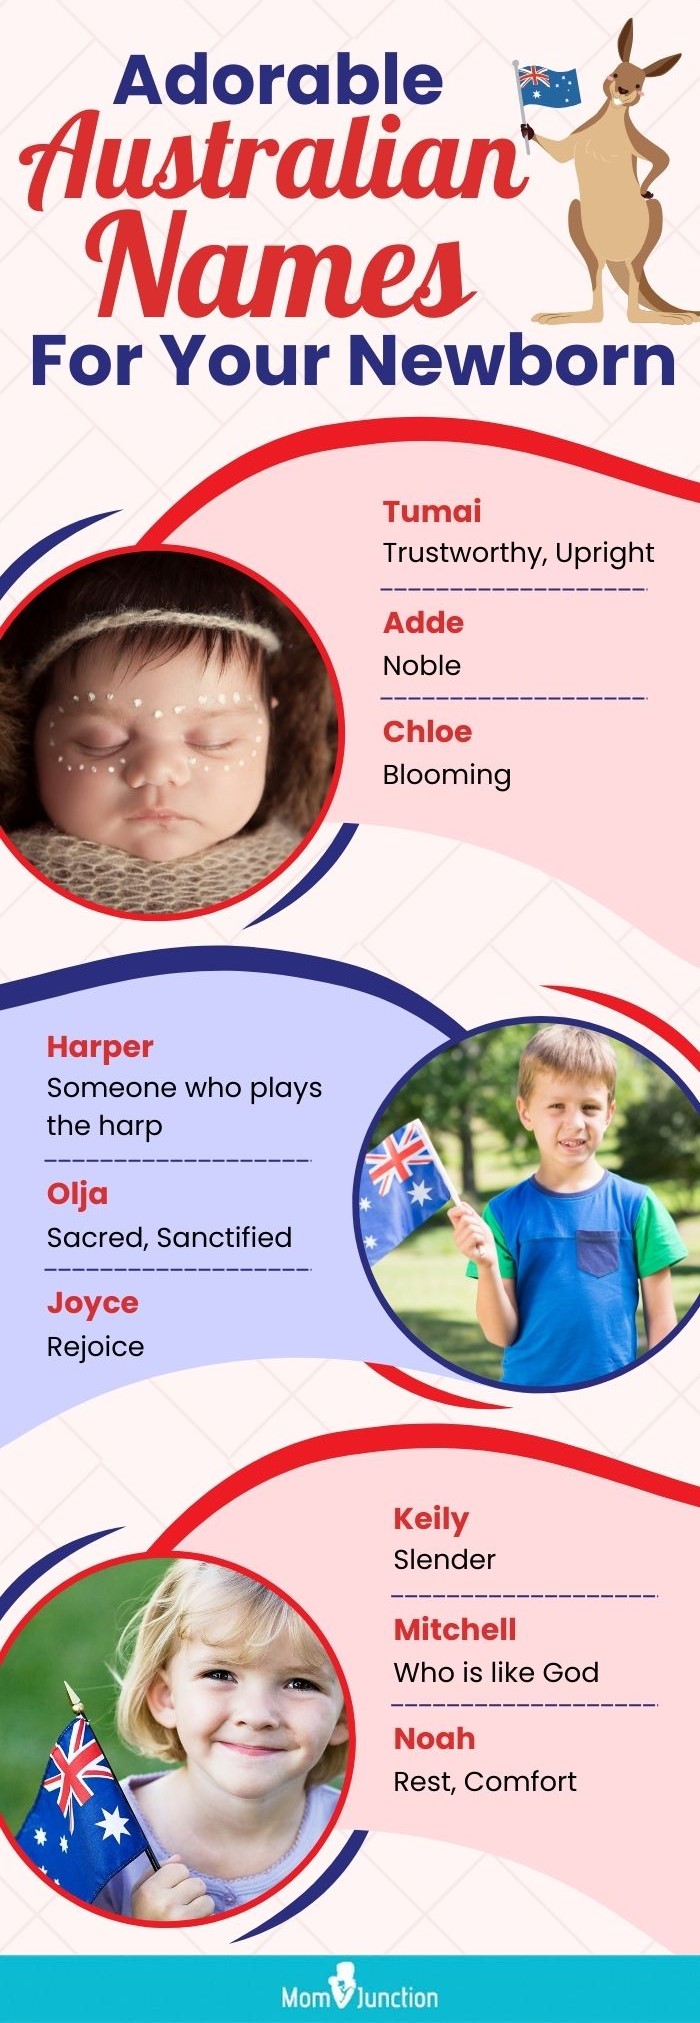 adorable australian names for your newborn (infographic)